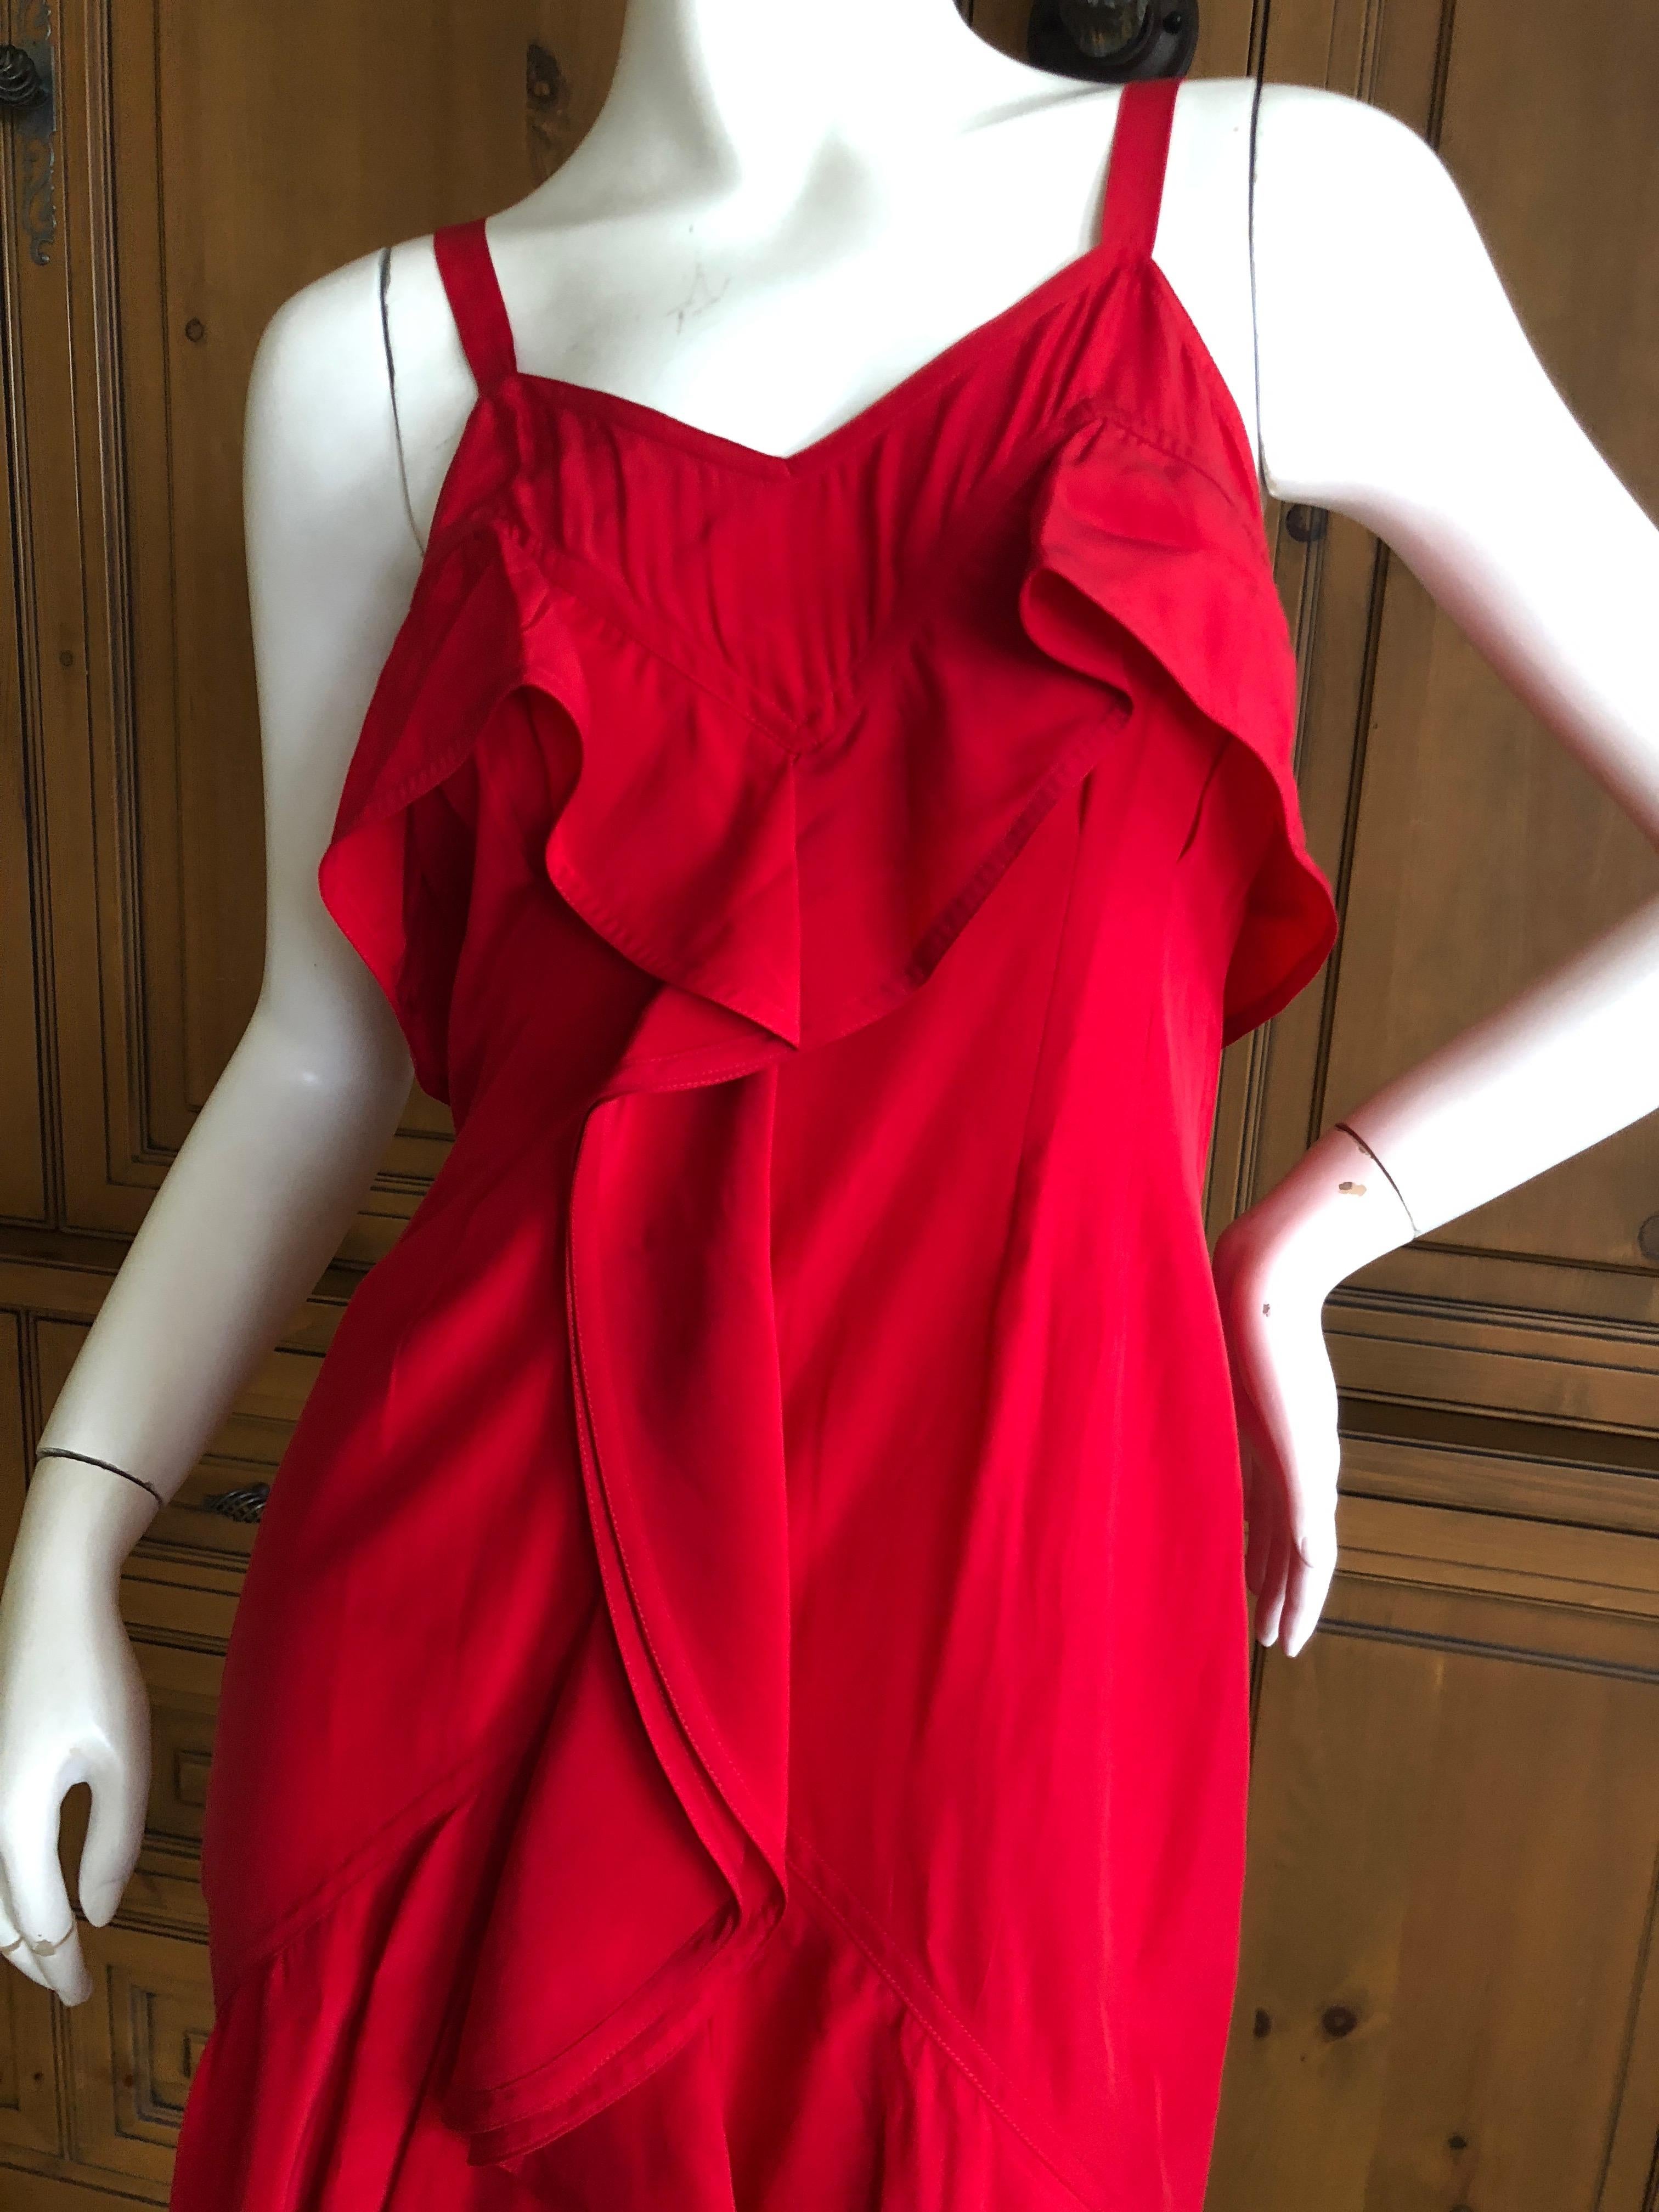 Yves Saint Laurent Tom Ford Fall 2003 Look 1 Red Ruffle Silk Dress For Sale 2